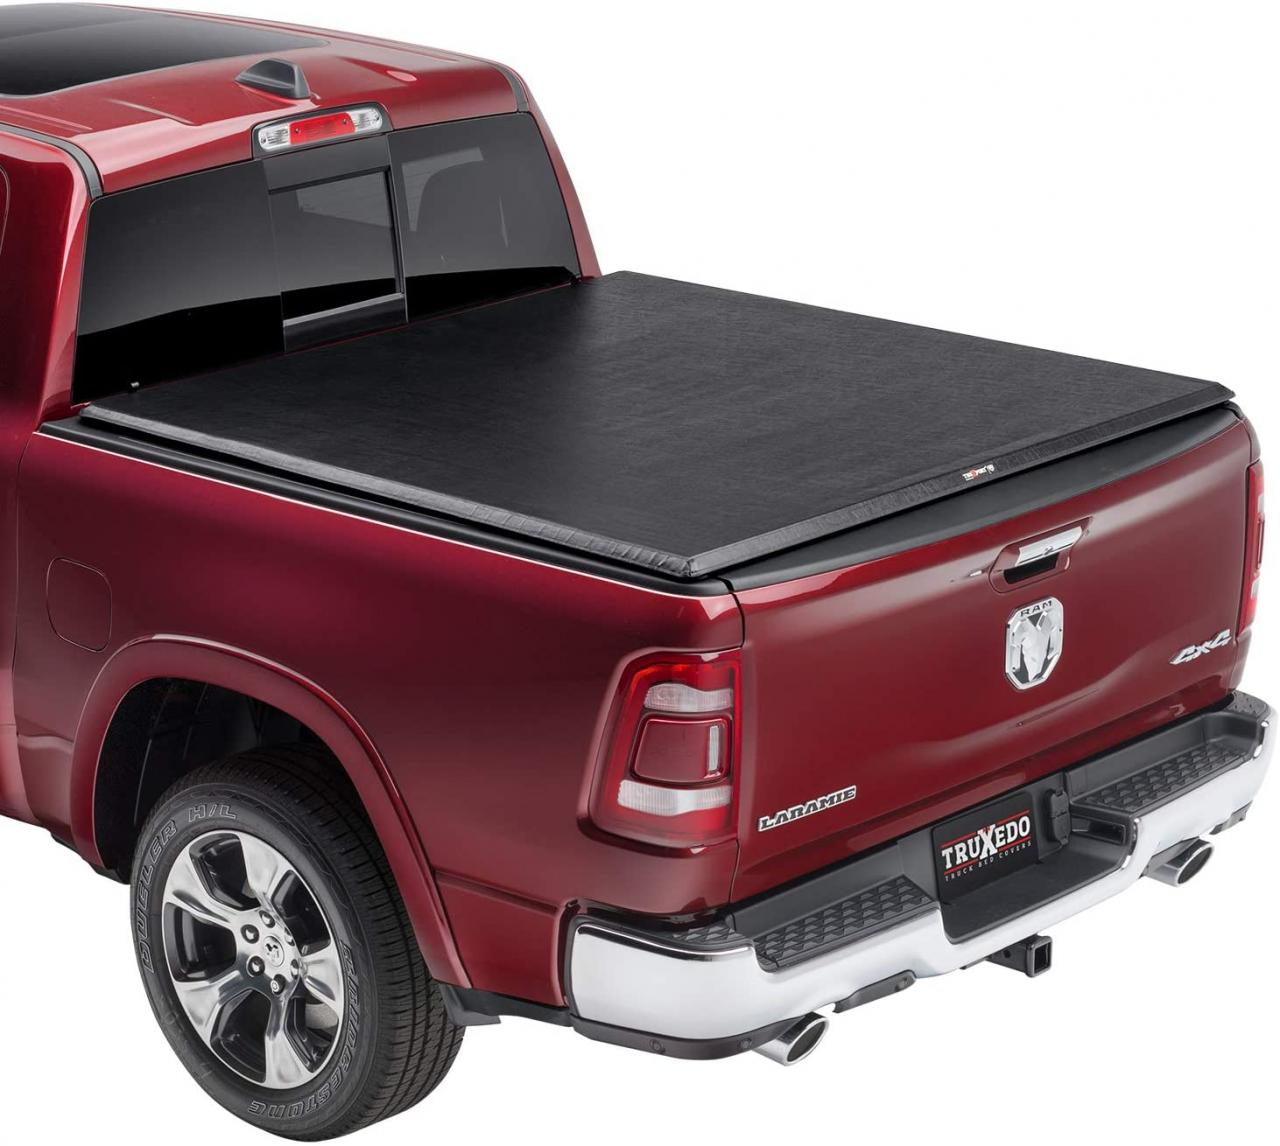 Buy TruXedo TruXport Soft Roll Up Truck Bed Tonneau Cover | 245901 | Fits  2009 - 2018, 2019-20 Classic Dodge Ram 1500 w/o RamBox 5' 7 Bed (67.4)  Online in Indonesia. B002EOZFQ4